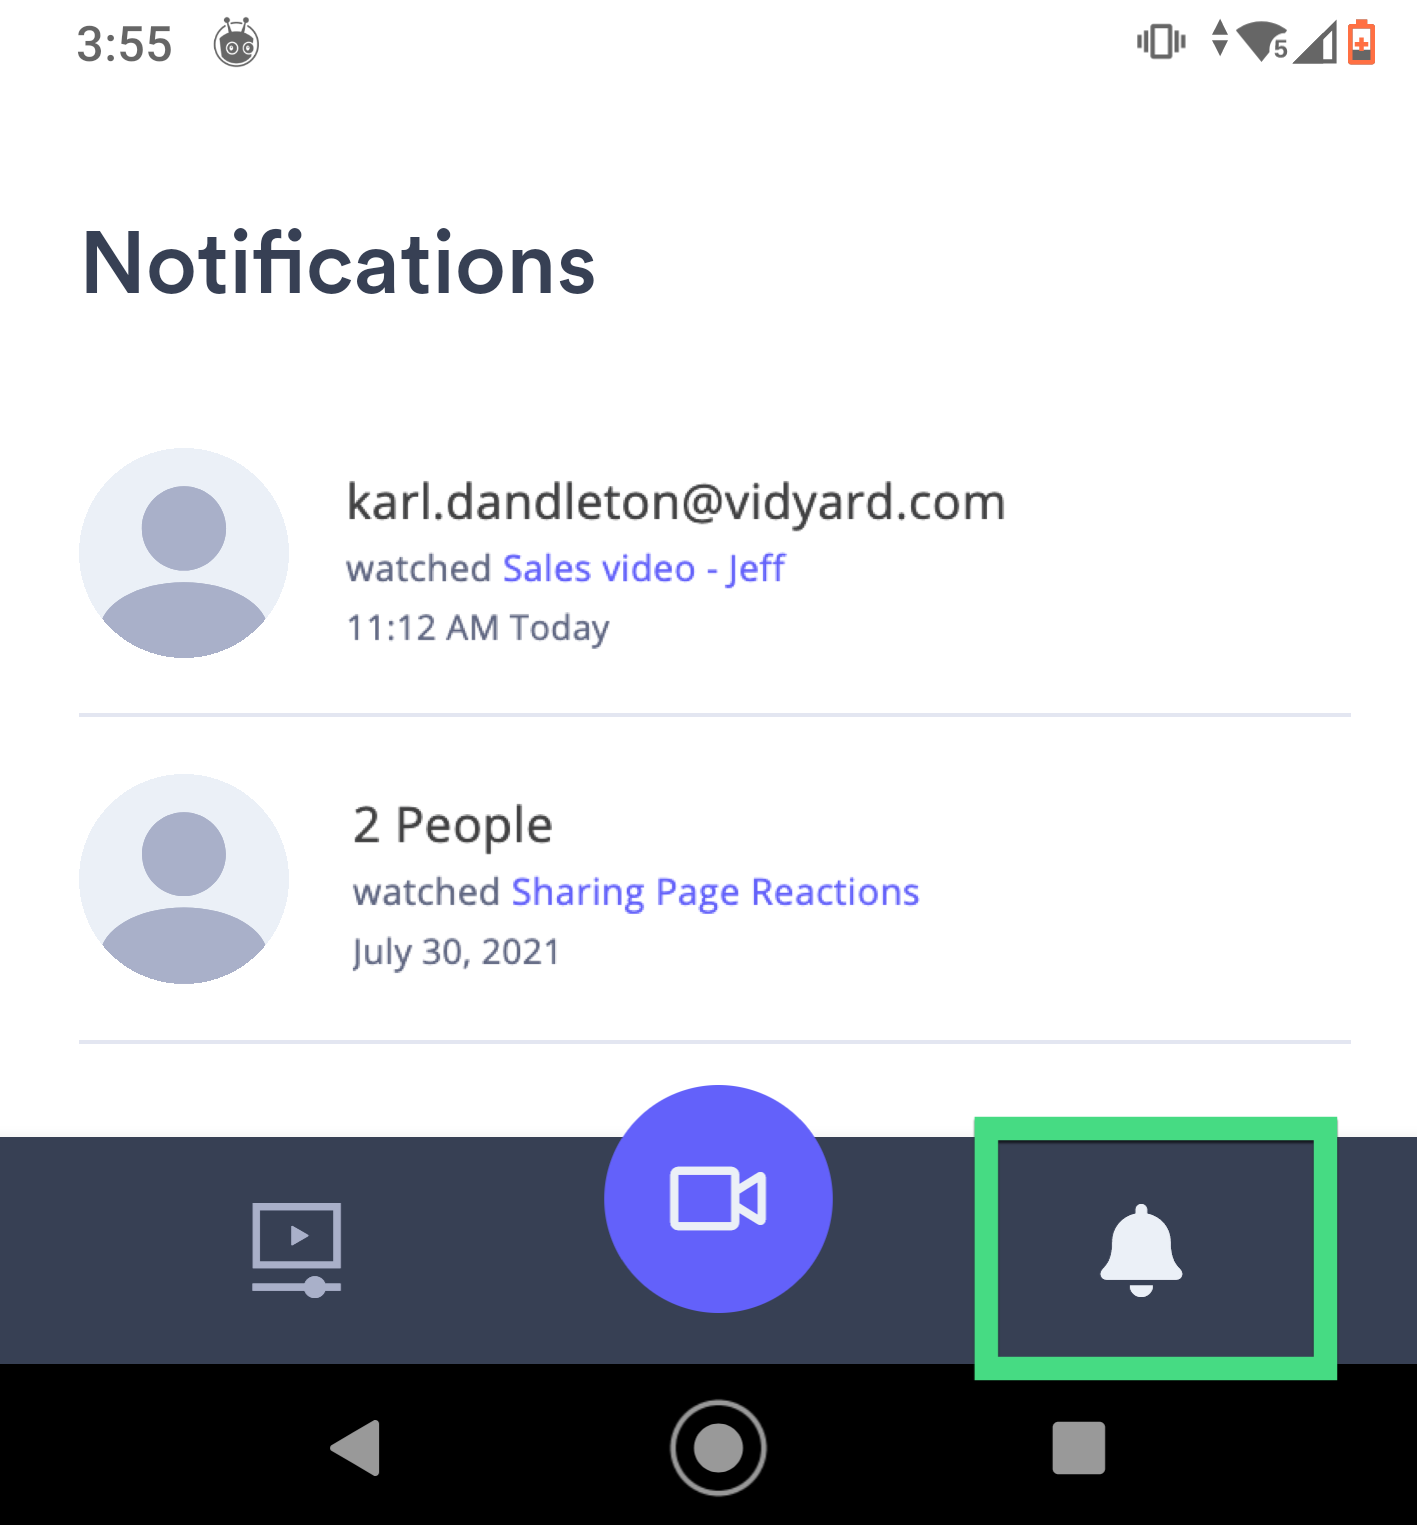 Notifications feed within the Vidyard mobile app, showing views and viewers